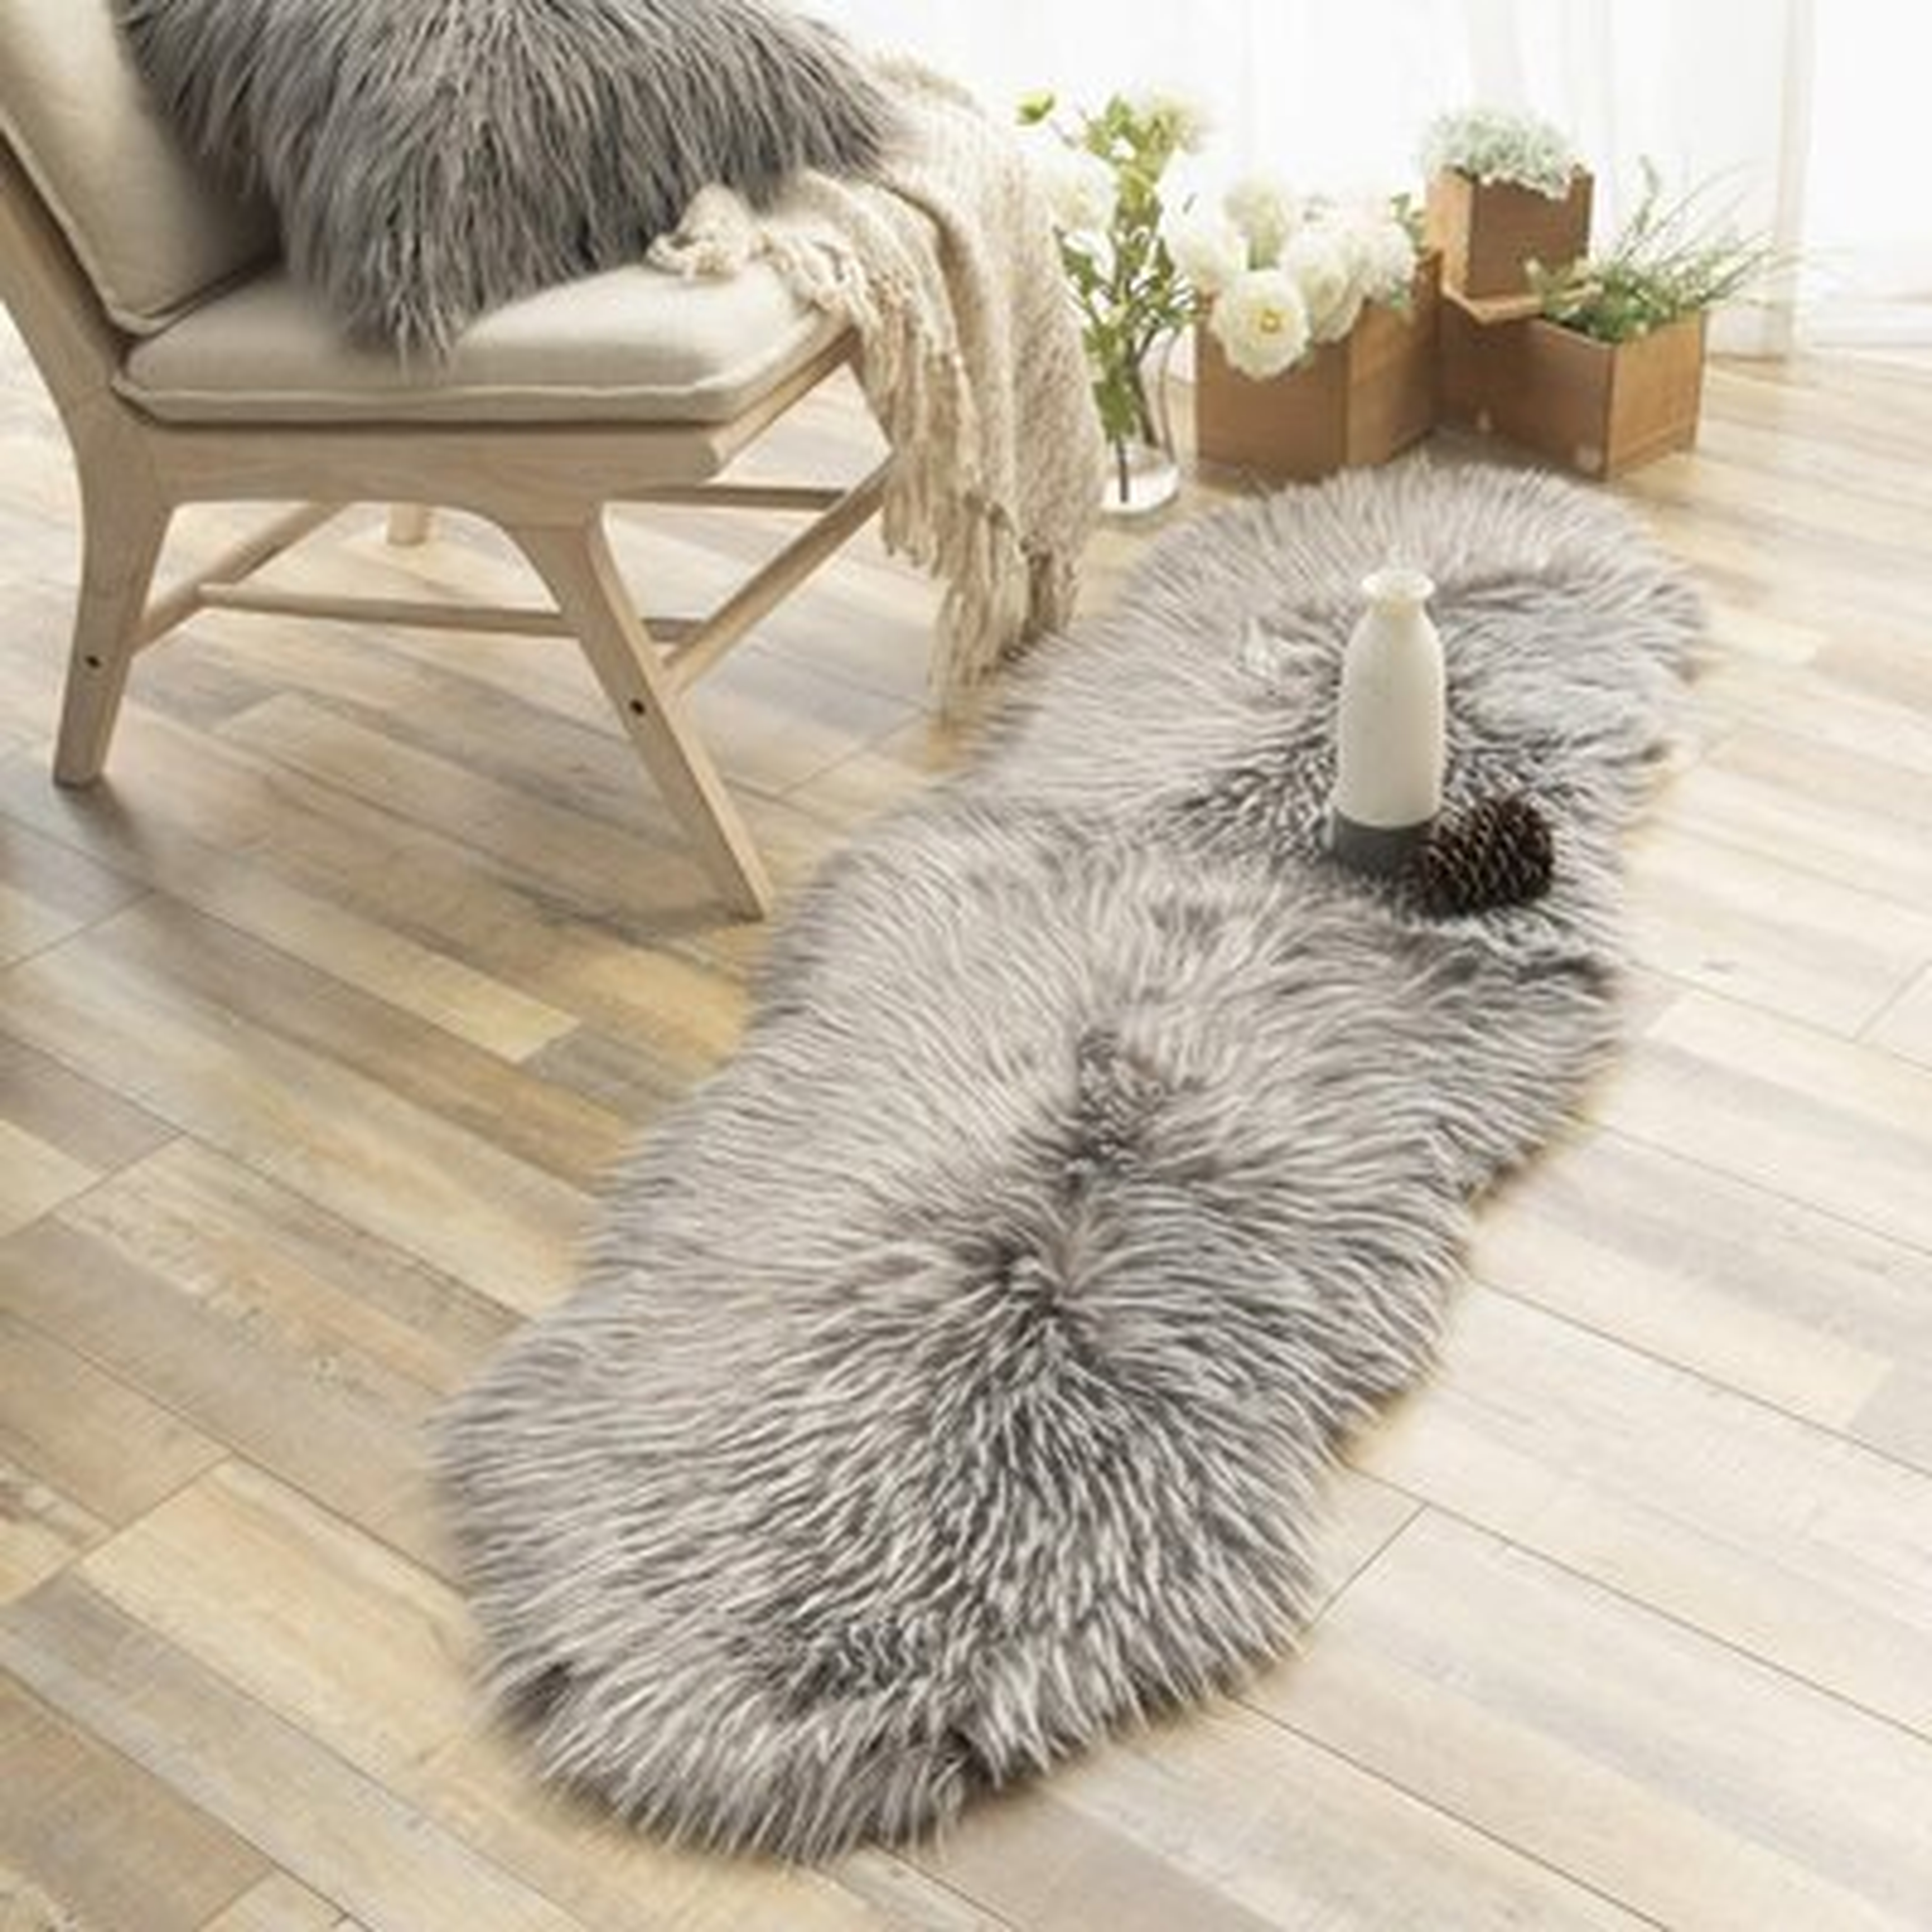 Faux Fur Rug Soft Faux Peacock Fluffy Rugs Luxurious Carpet Rugs Area Rug For Bedroom, Living Room Carpet in , Runner 2' x 6' - Wayfair